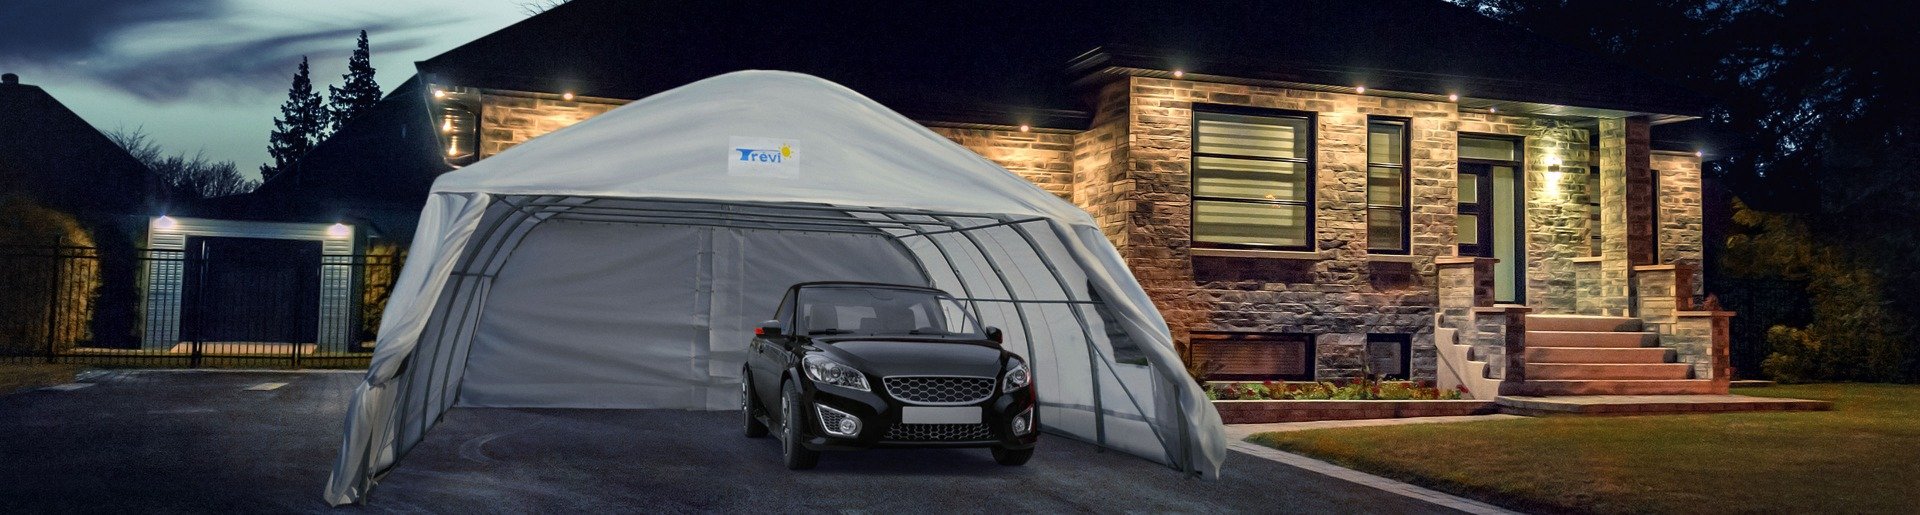 Car shelters